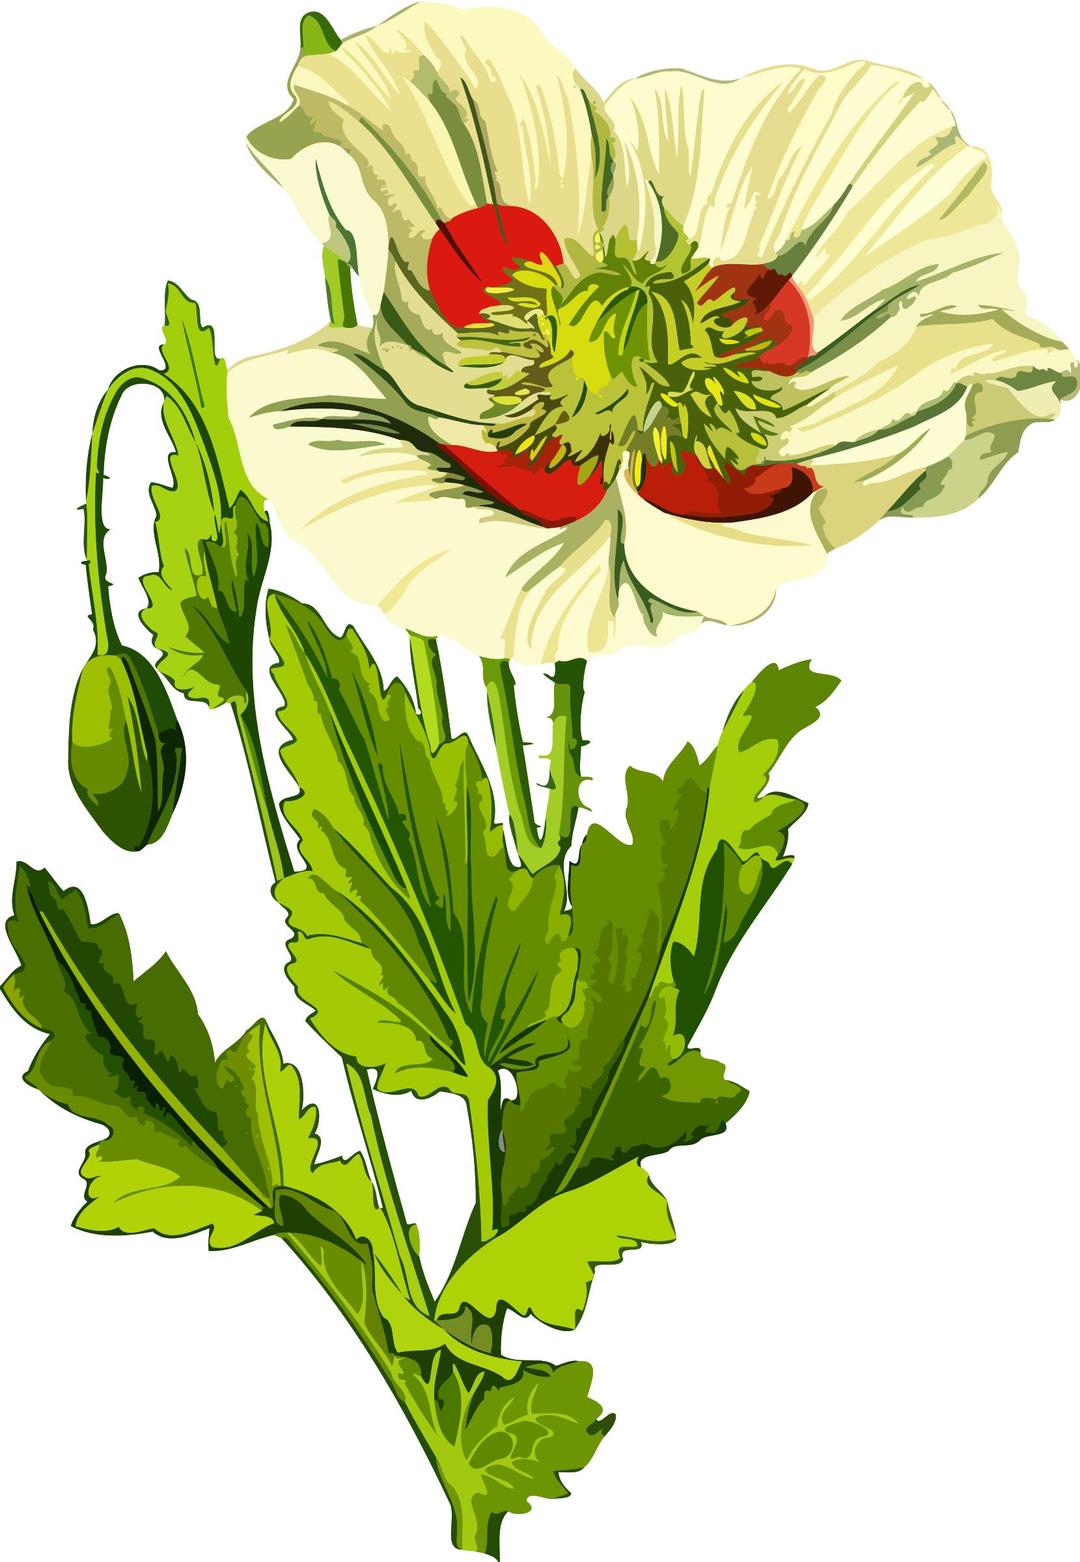 Opium poppy 3 (low resoloution) png transparent